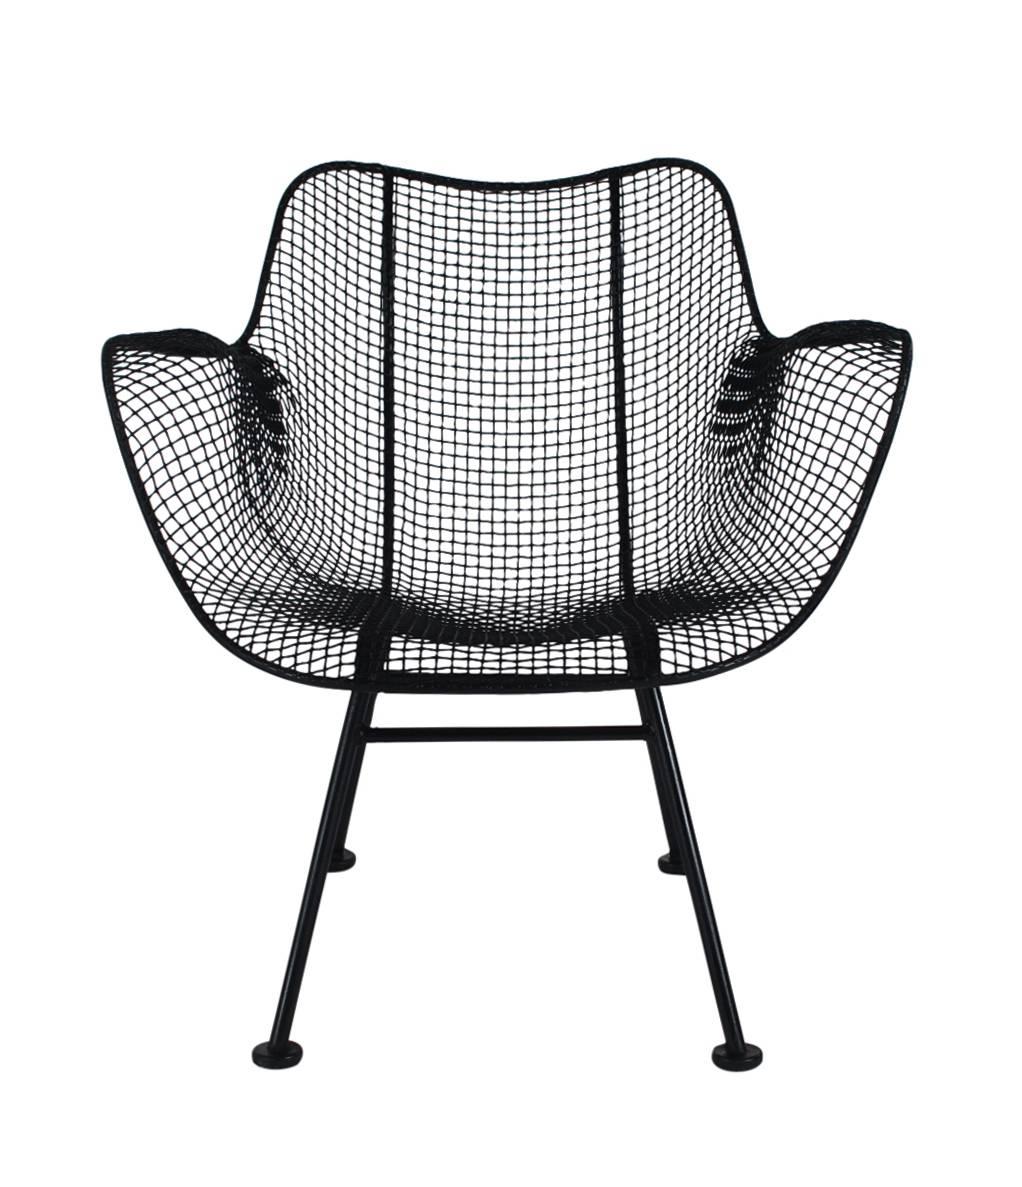 A beautiful matching set of sculpture wire lounge chairs designed by Russell Woodard in the 1950s. Suited for outdoor patio or inside use. The feature galvanized steel construction which is sculpted in an ergonomic form.